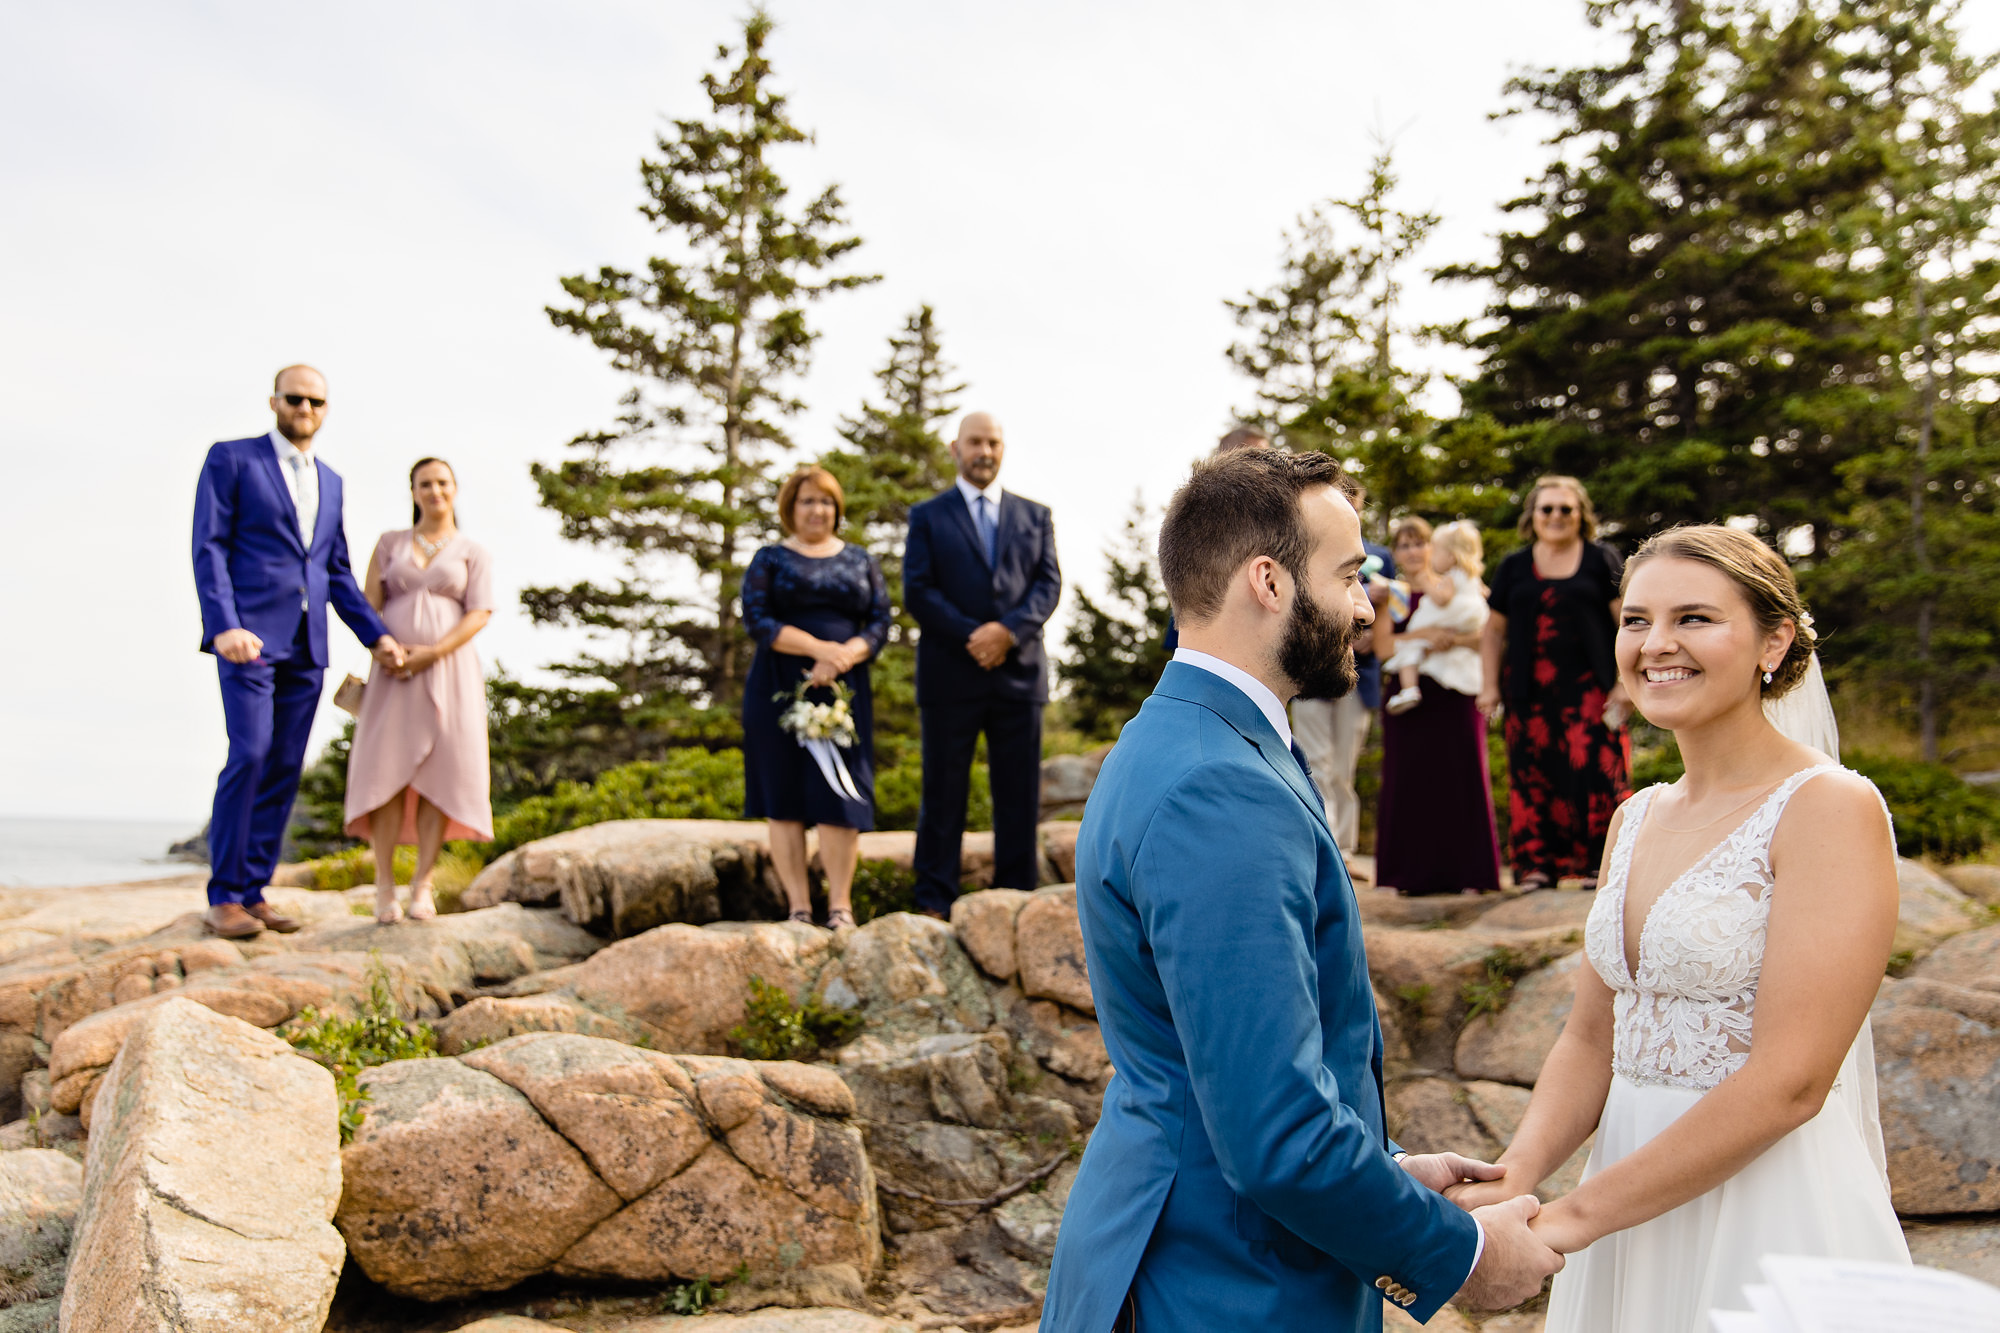 An Acadia National Parkelopement ceremony taking place on the cliffs in Maine